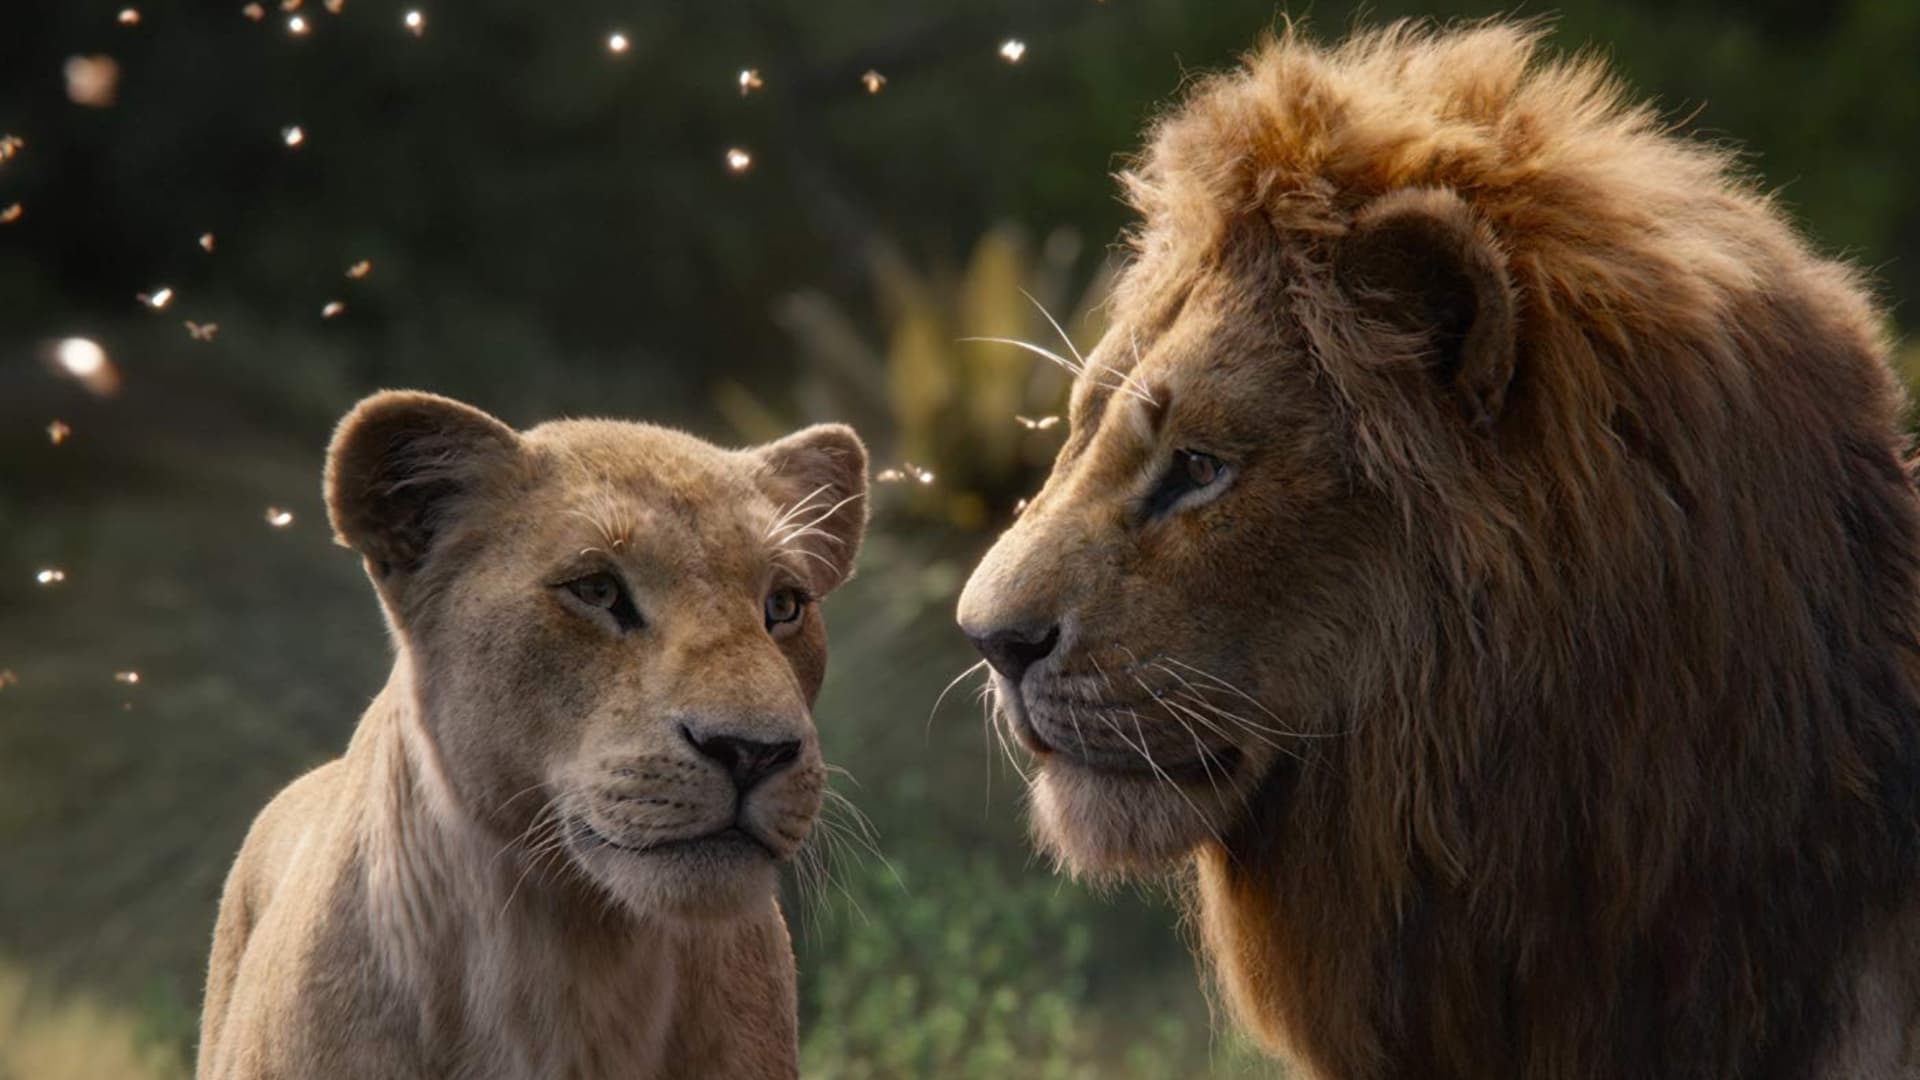 The Lion King CGI: An Incredible Photorealistic Journey That Will Leave You Breathless! 17